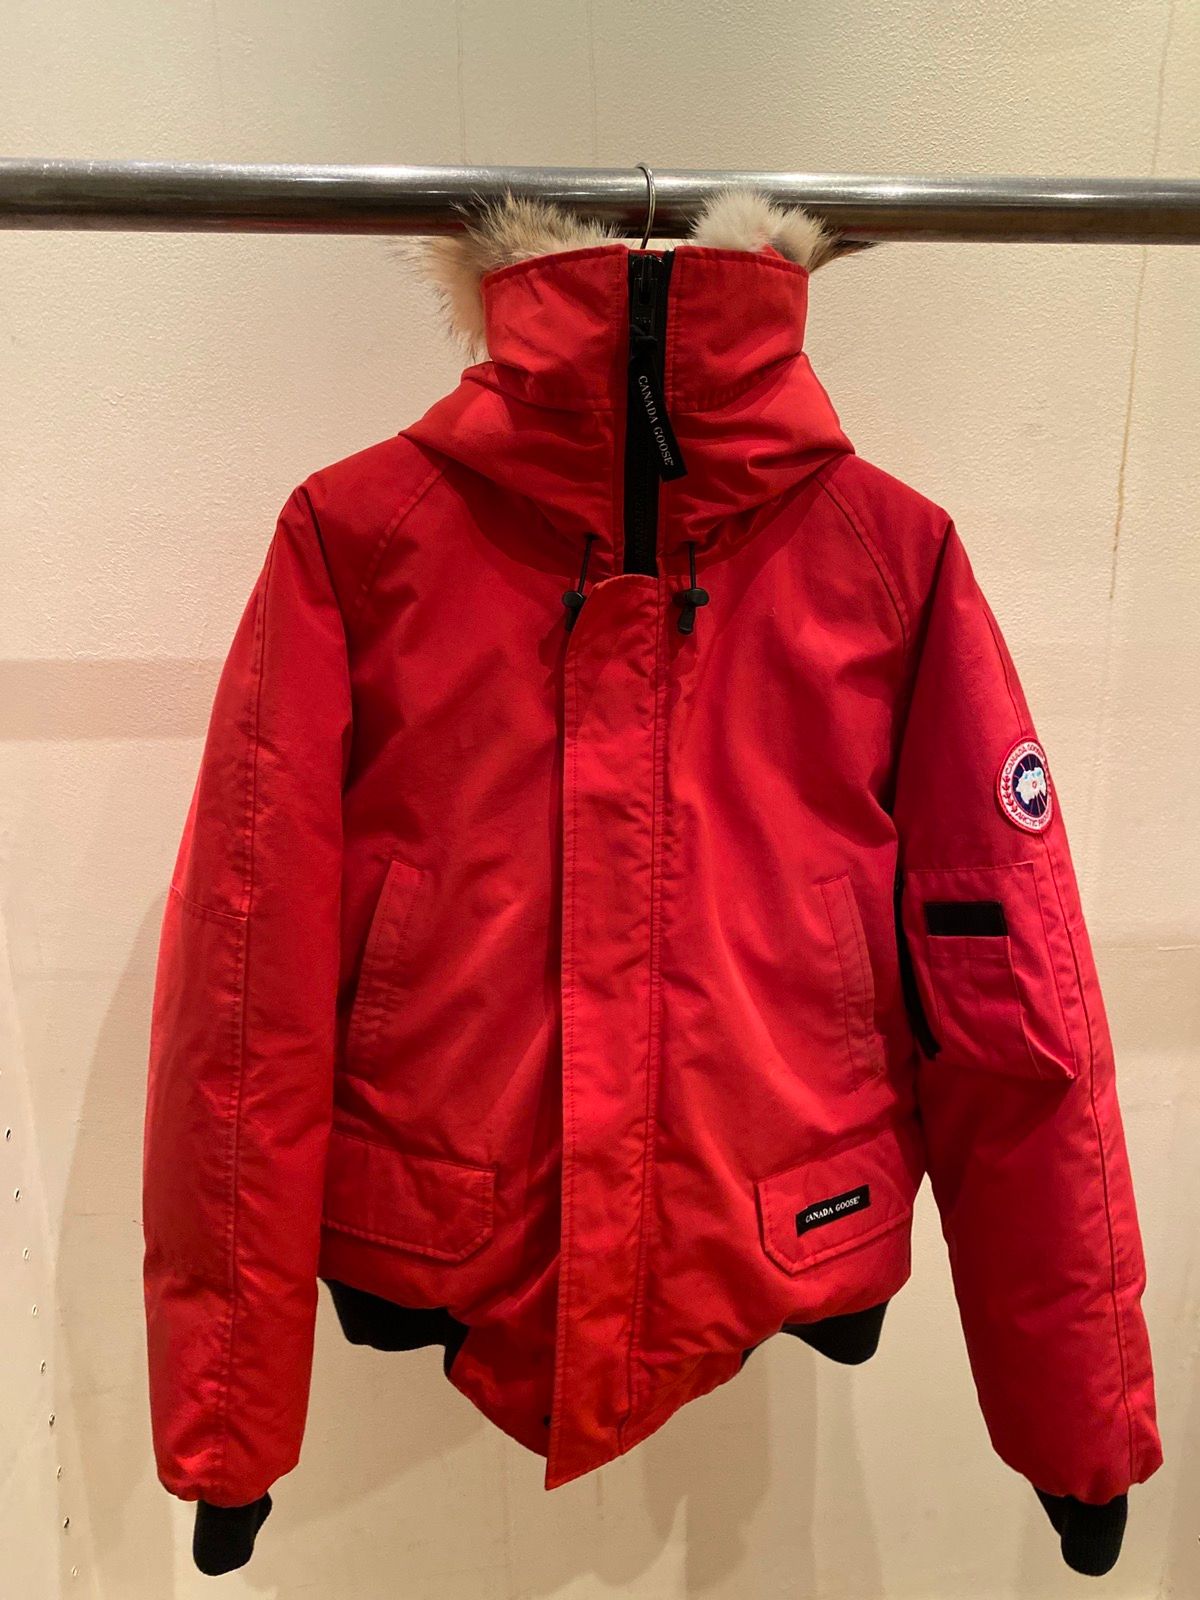 Canada Goose Canada Goose Chilliwack Bomber Jacket Size US L / EU 52-54 / 3 - 1 Preview